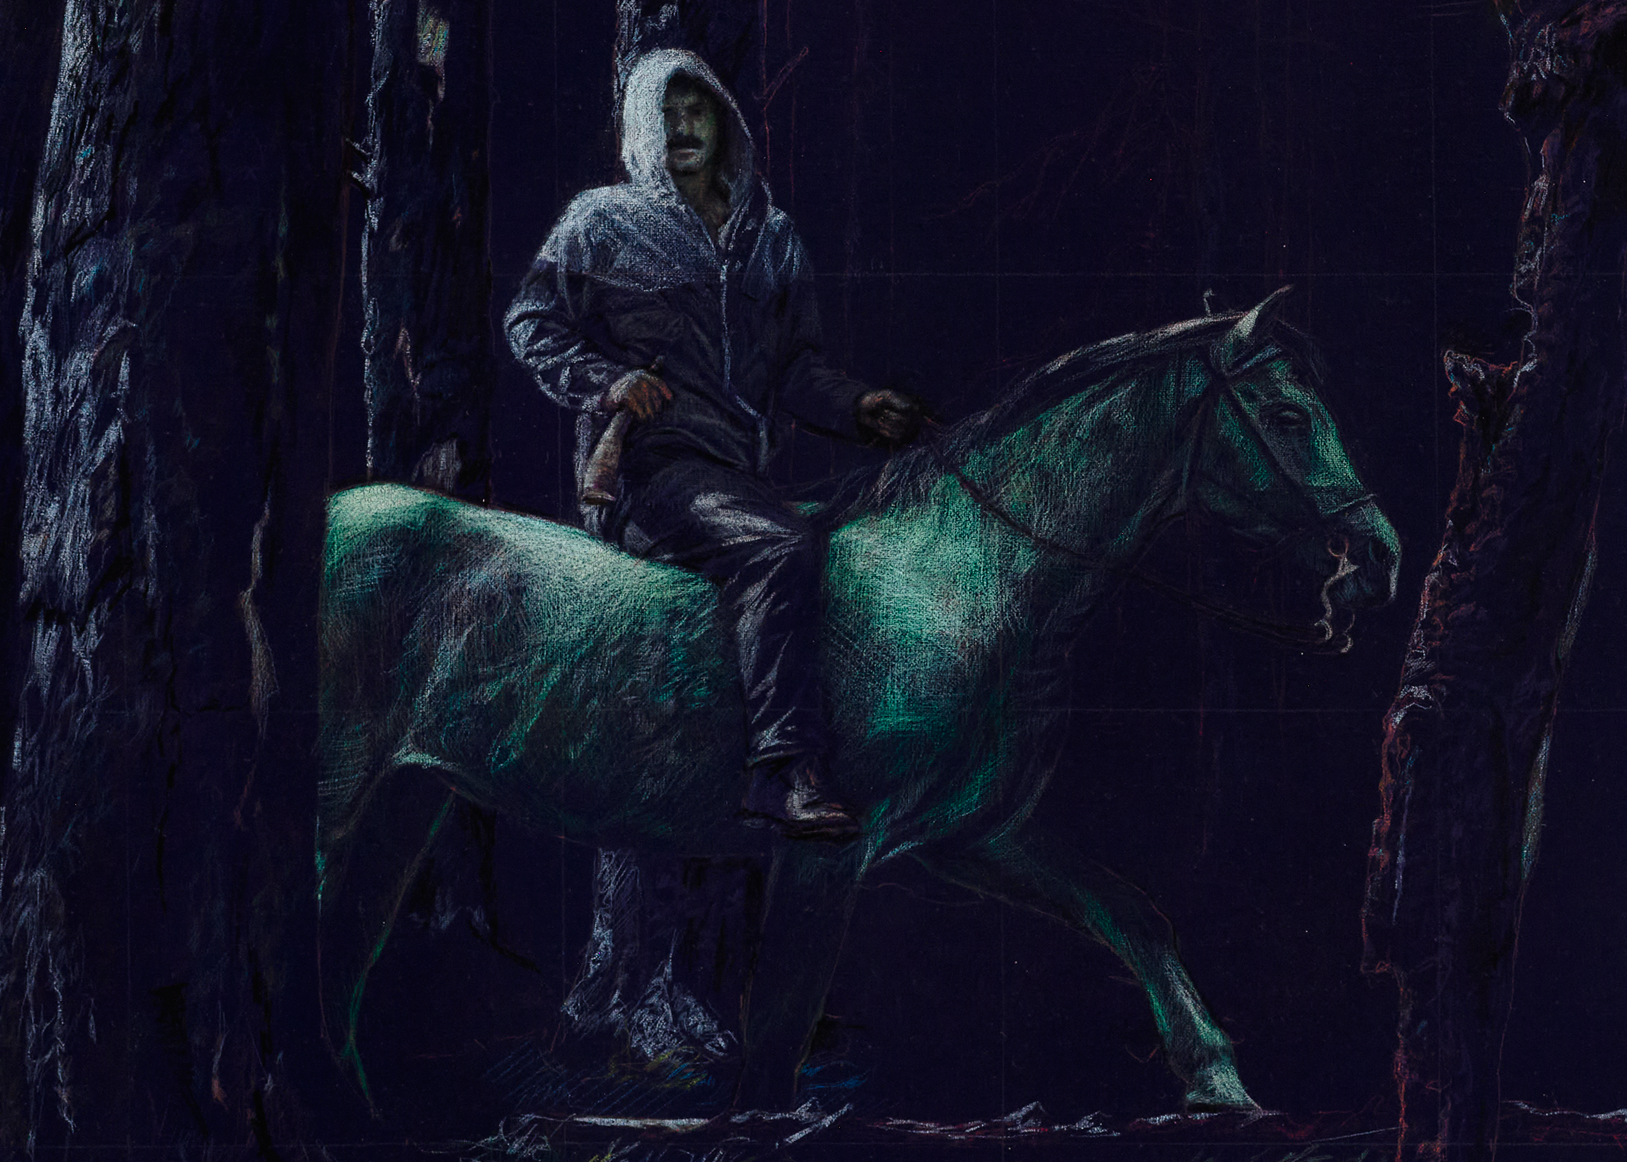 Man in a hoodie riding a horse